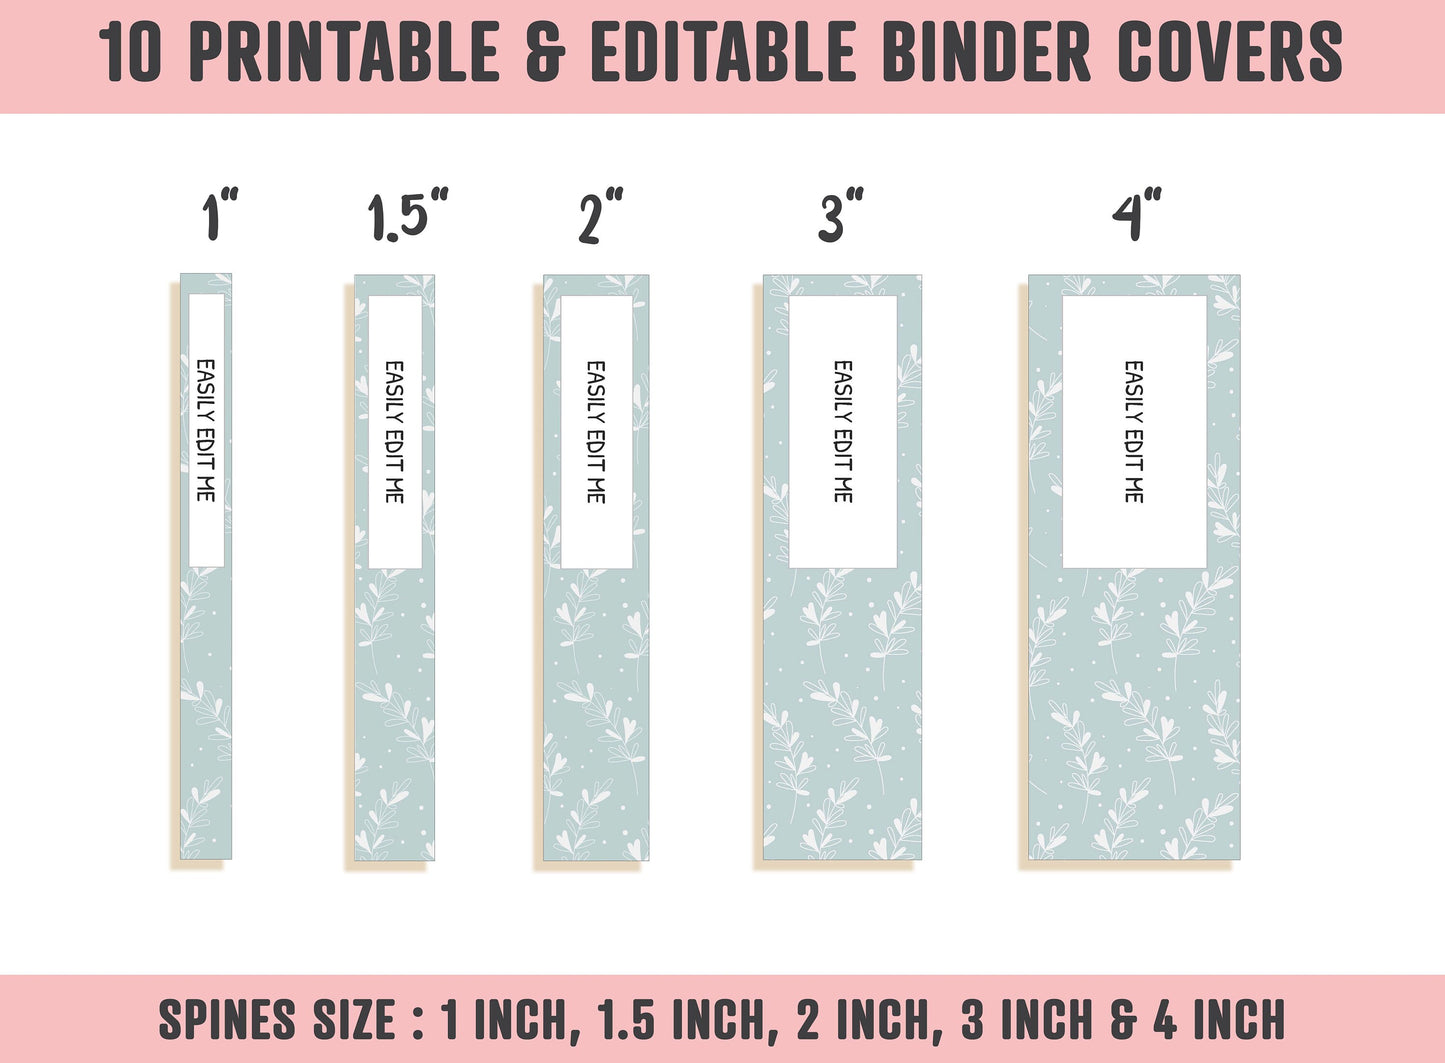 Binder Cover Set, 10 Editable Covers+Spines, Printable, Binder Cover Printable, Teacher/School Binder, Planner Cover, Binder Cover Inserts